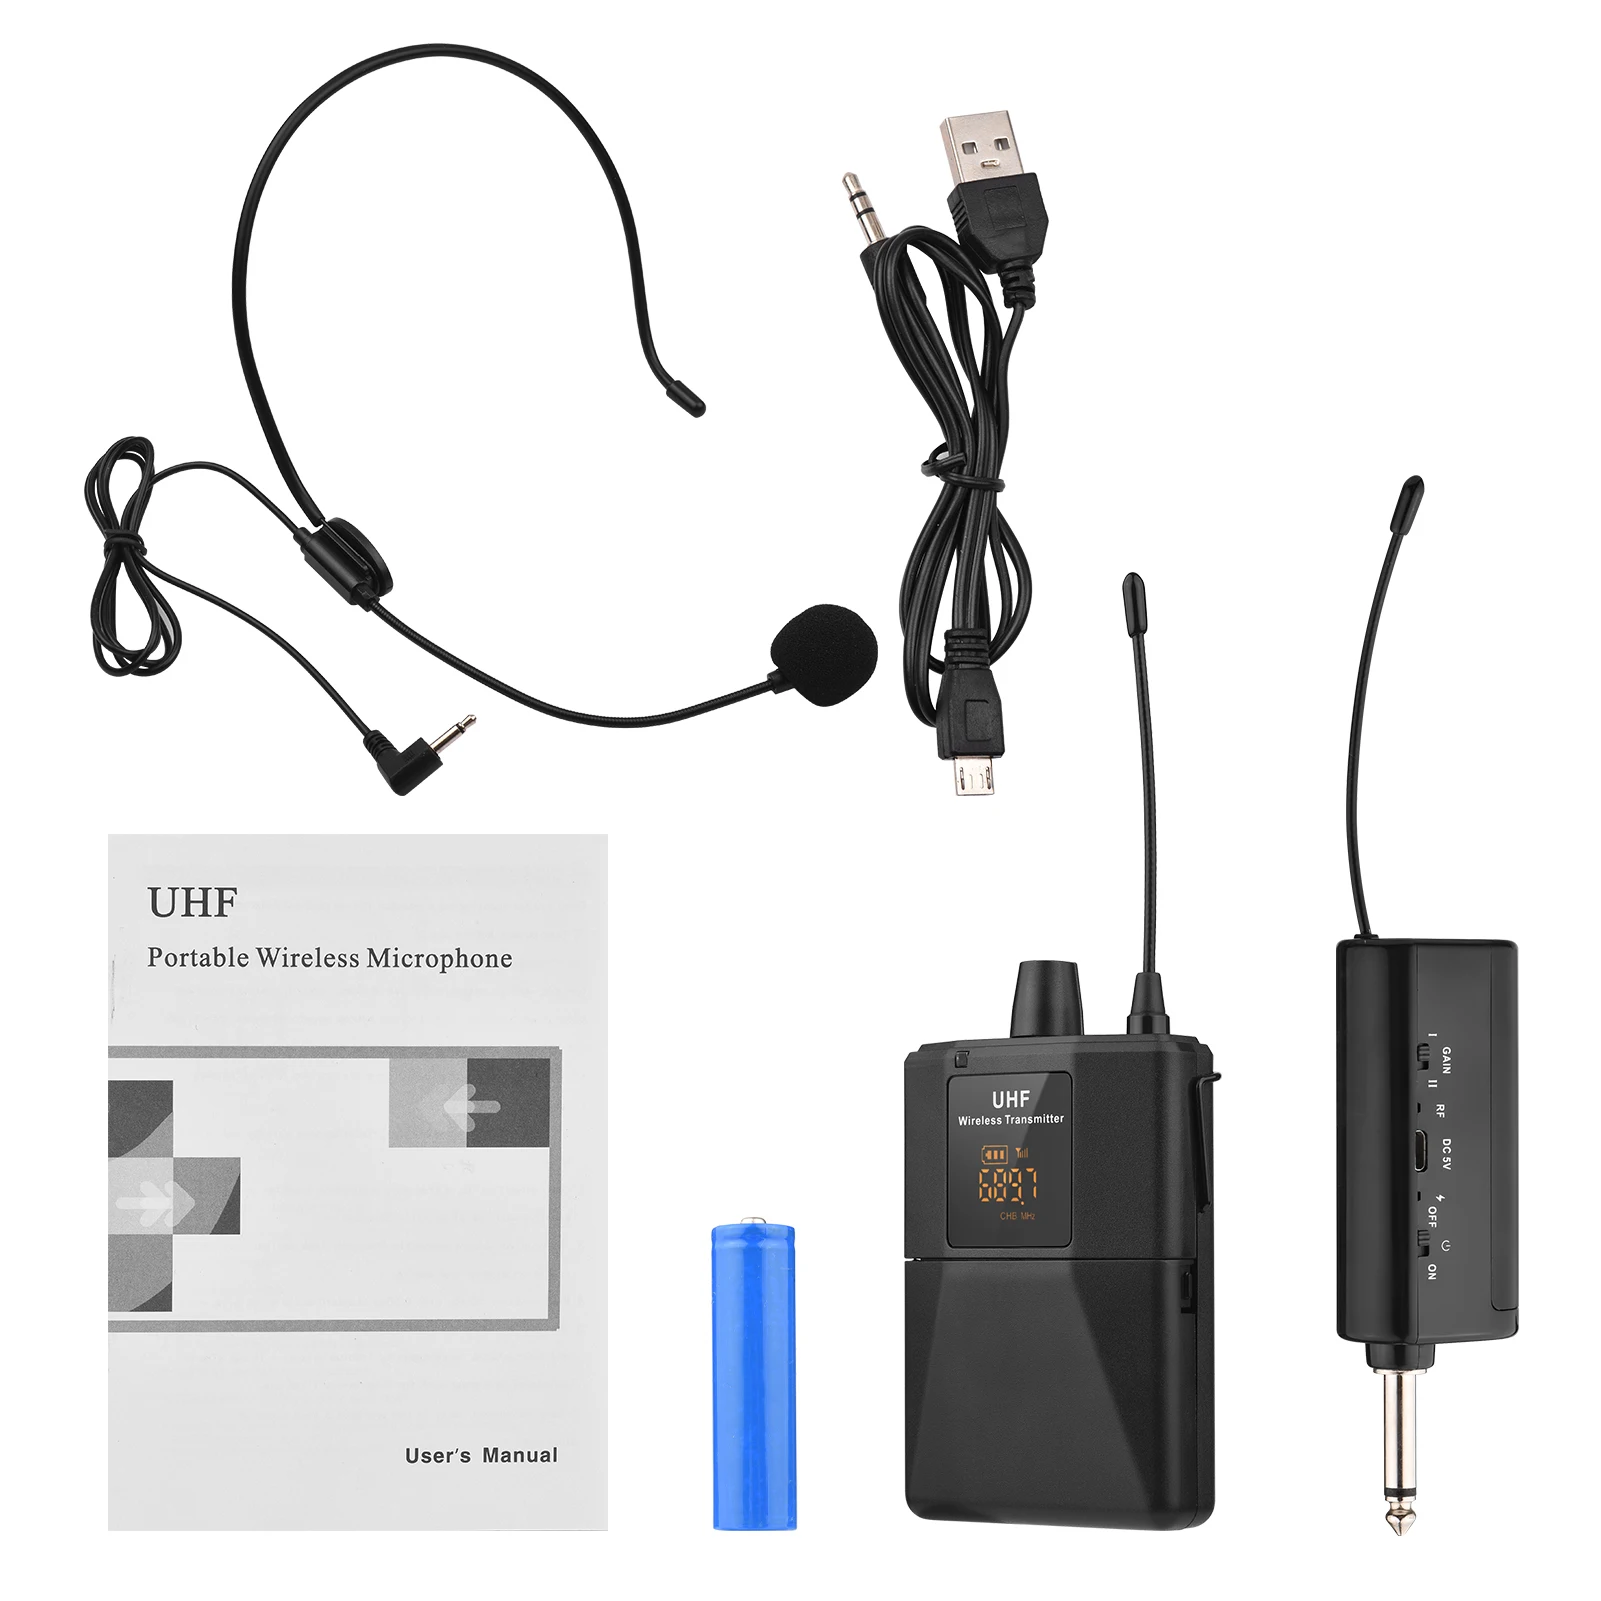 

UHF Wireless Headset Microphone with Transmitter & Receiver LED Digital Display Bodypack Transmitter for Teaching Meeting Speech